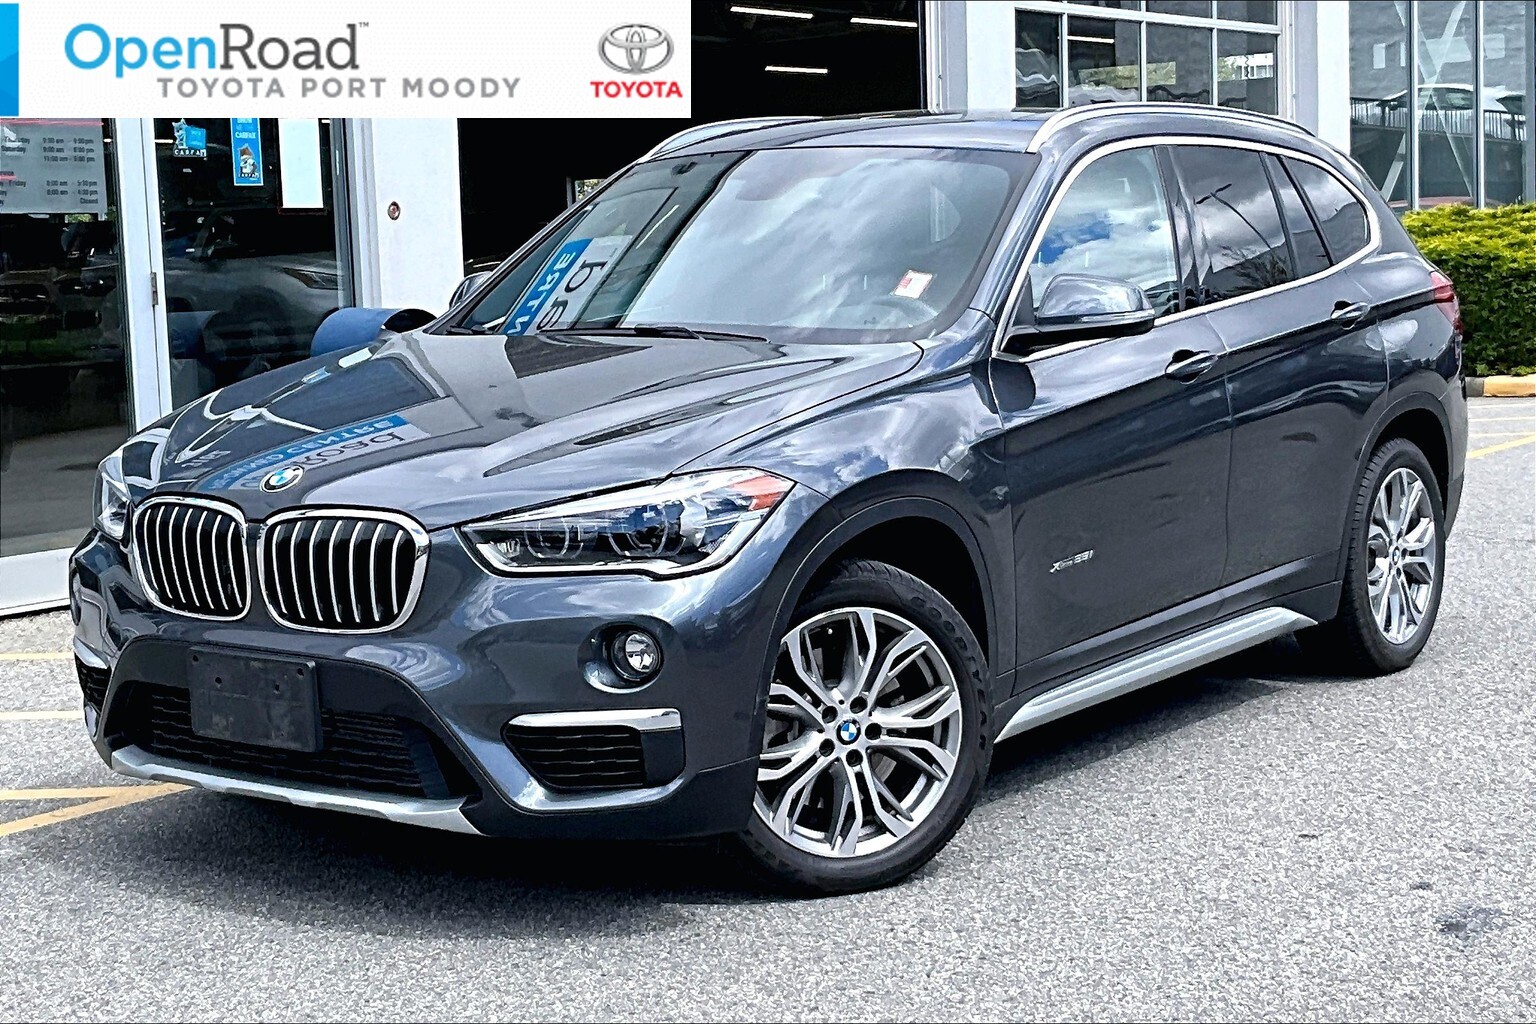 2017 BMW X1 xDrive28i |OpenRoad True Price |Local |One Owner